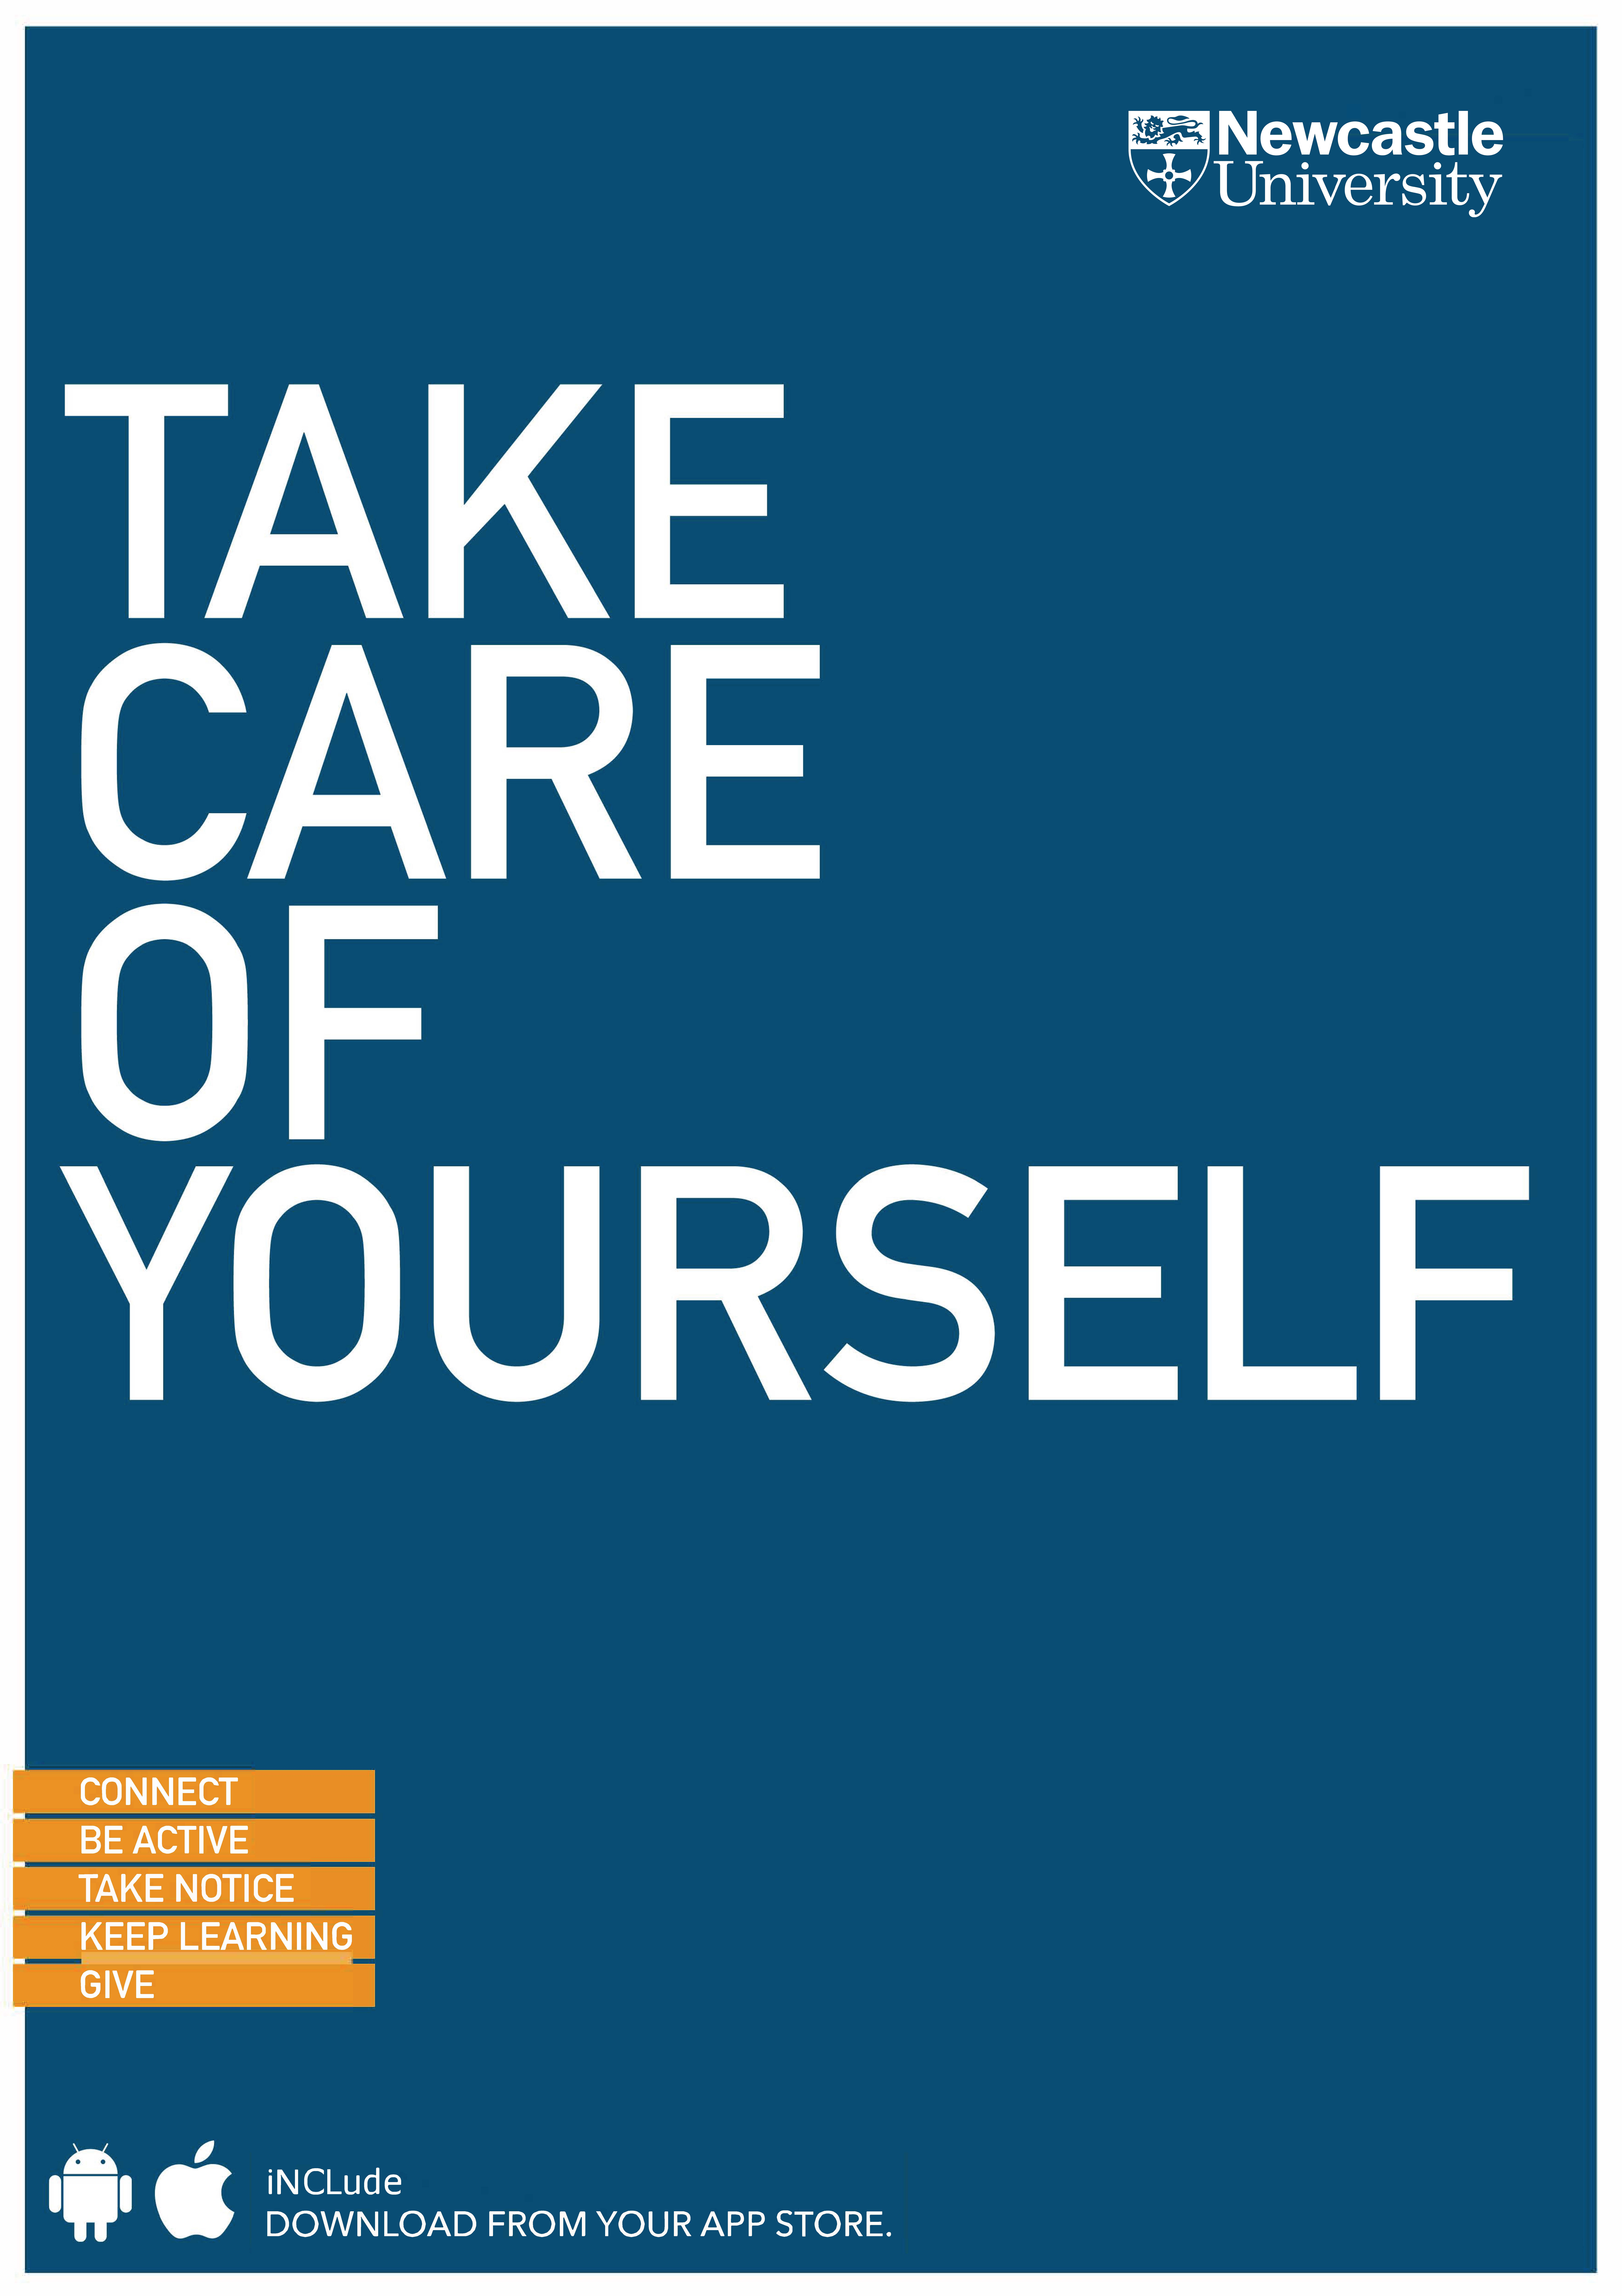 UniWellBeing_Poster_ILL01